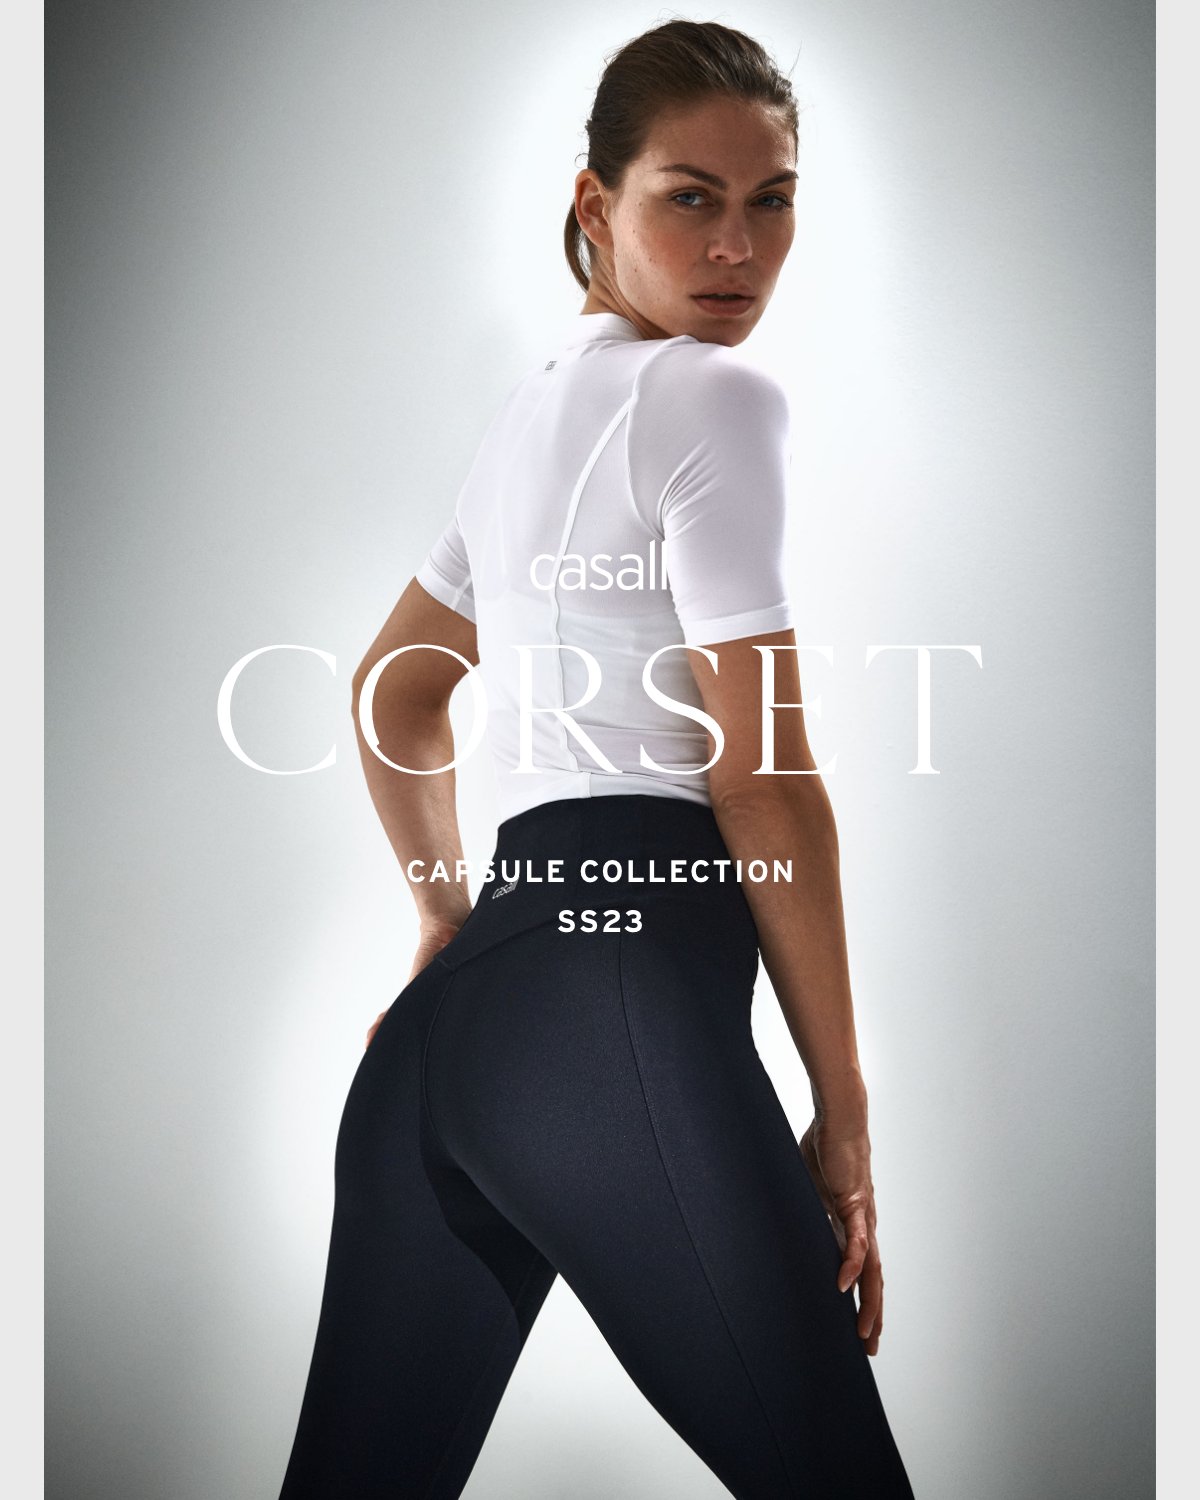 Curious about the workout wear everyone loves? - Casall